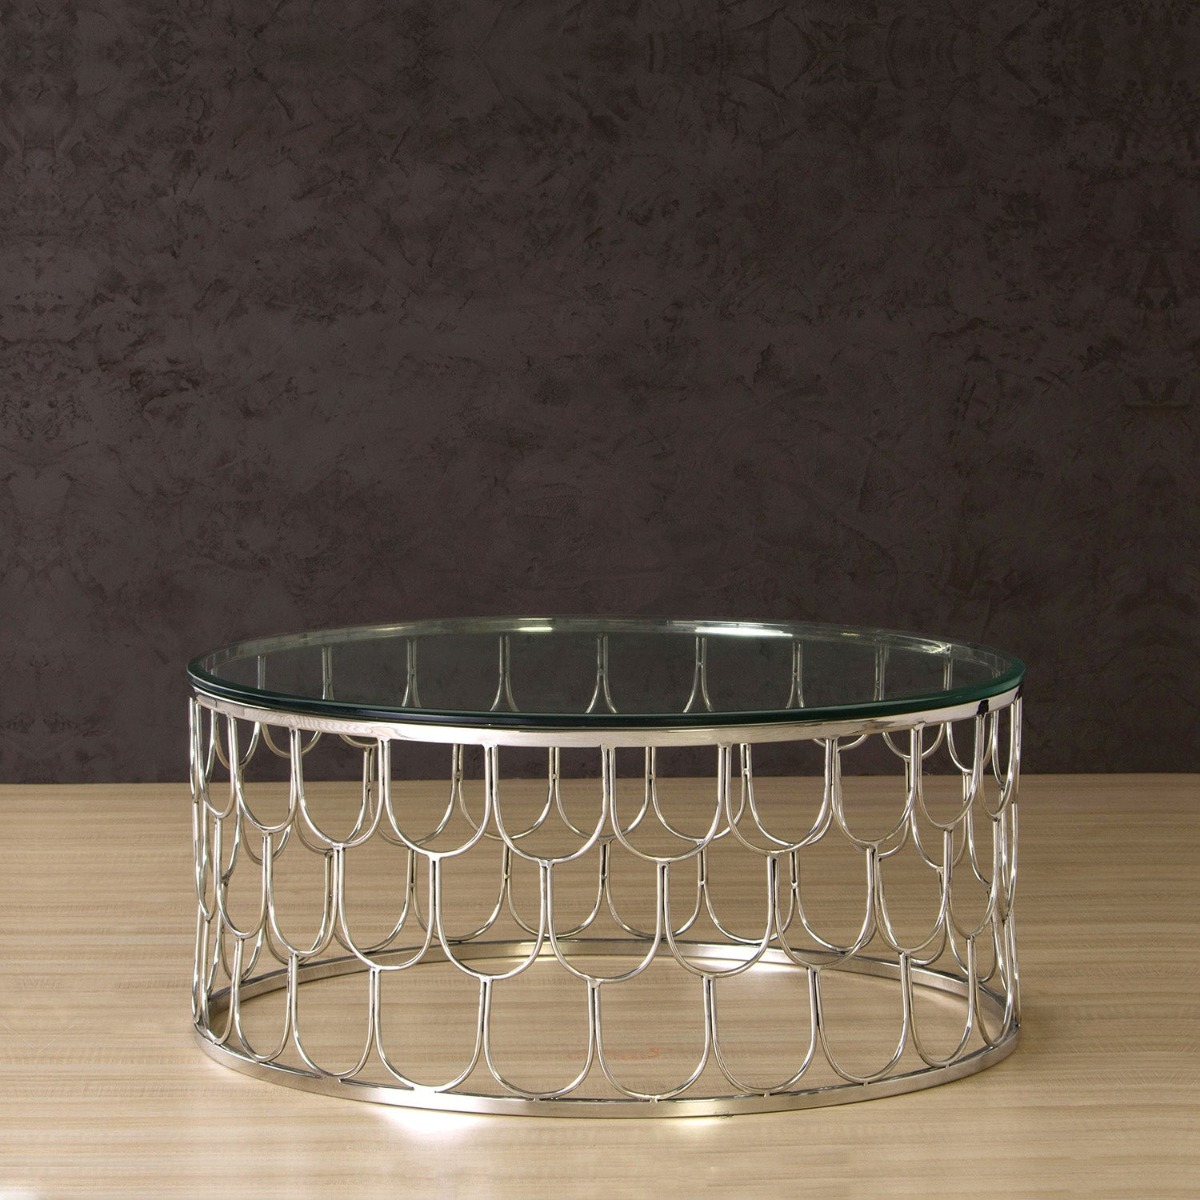 Pearl Glass Round Coffee Table In Chrome Finish